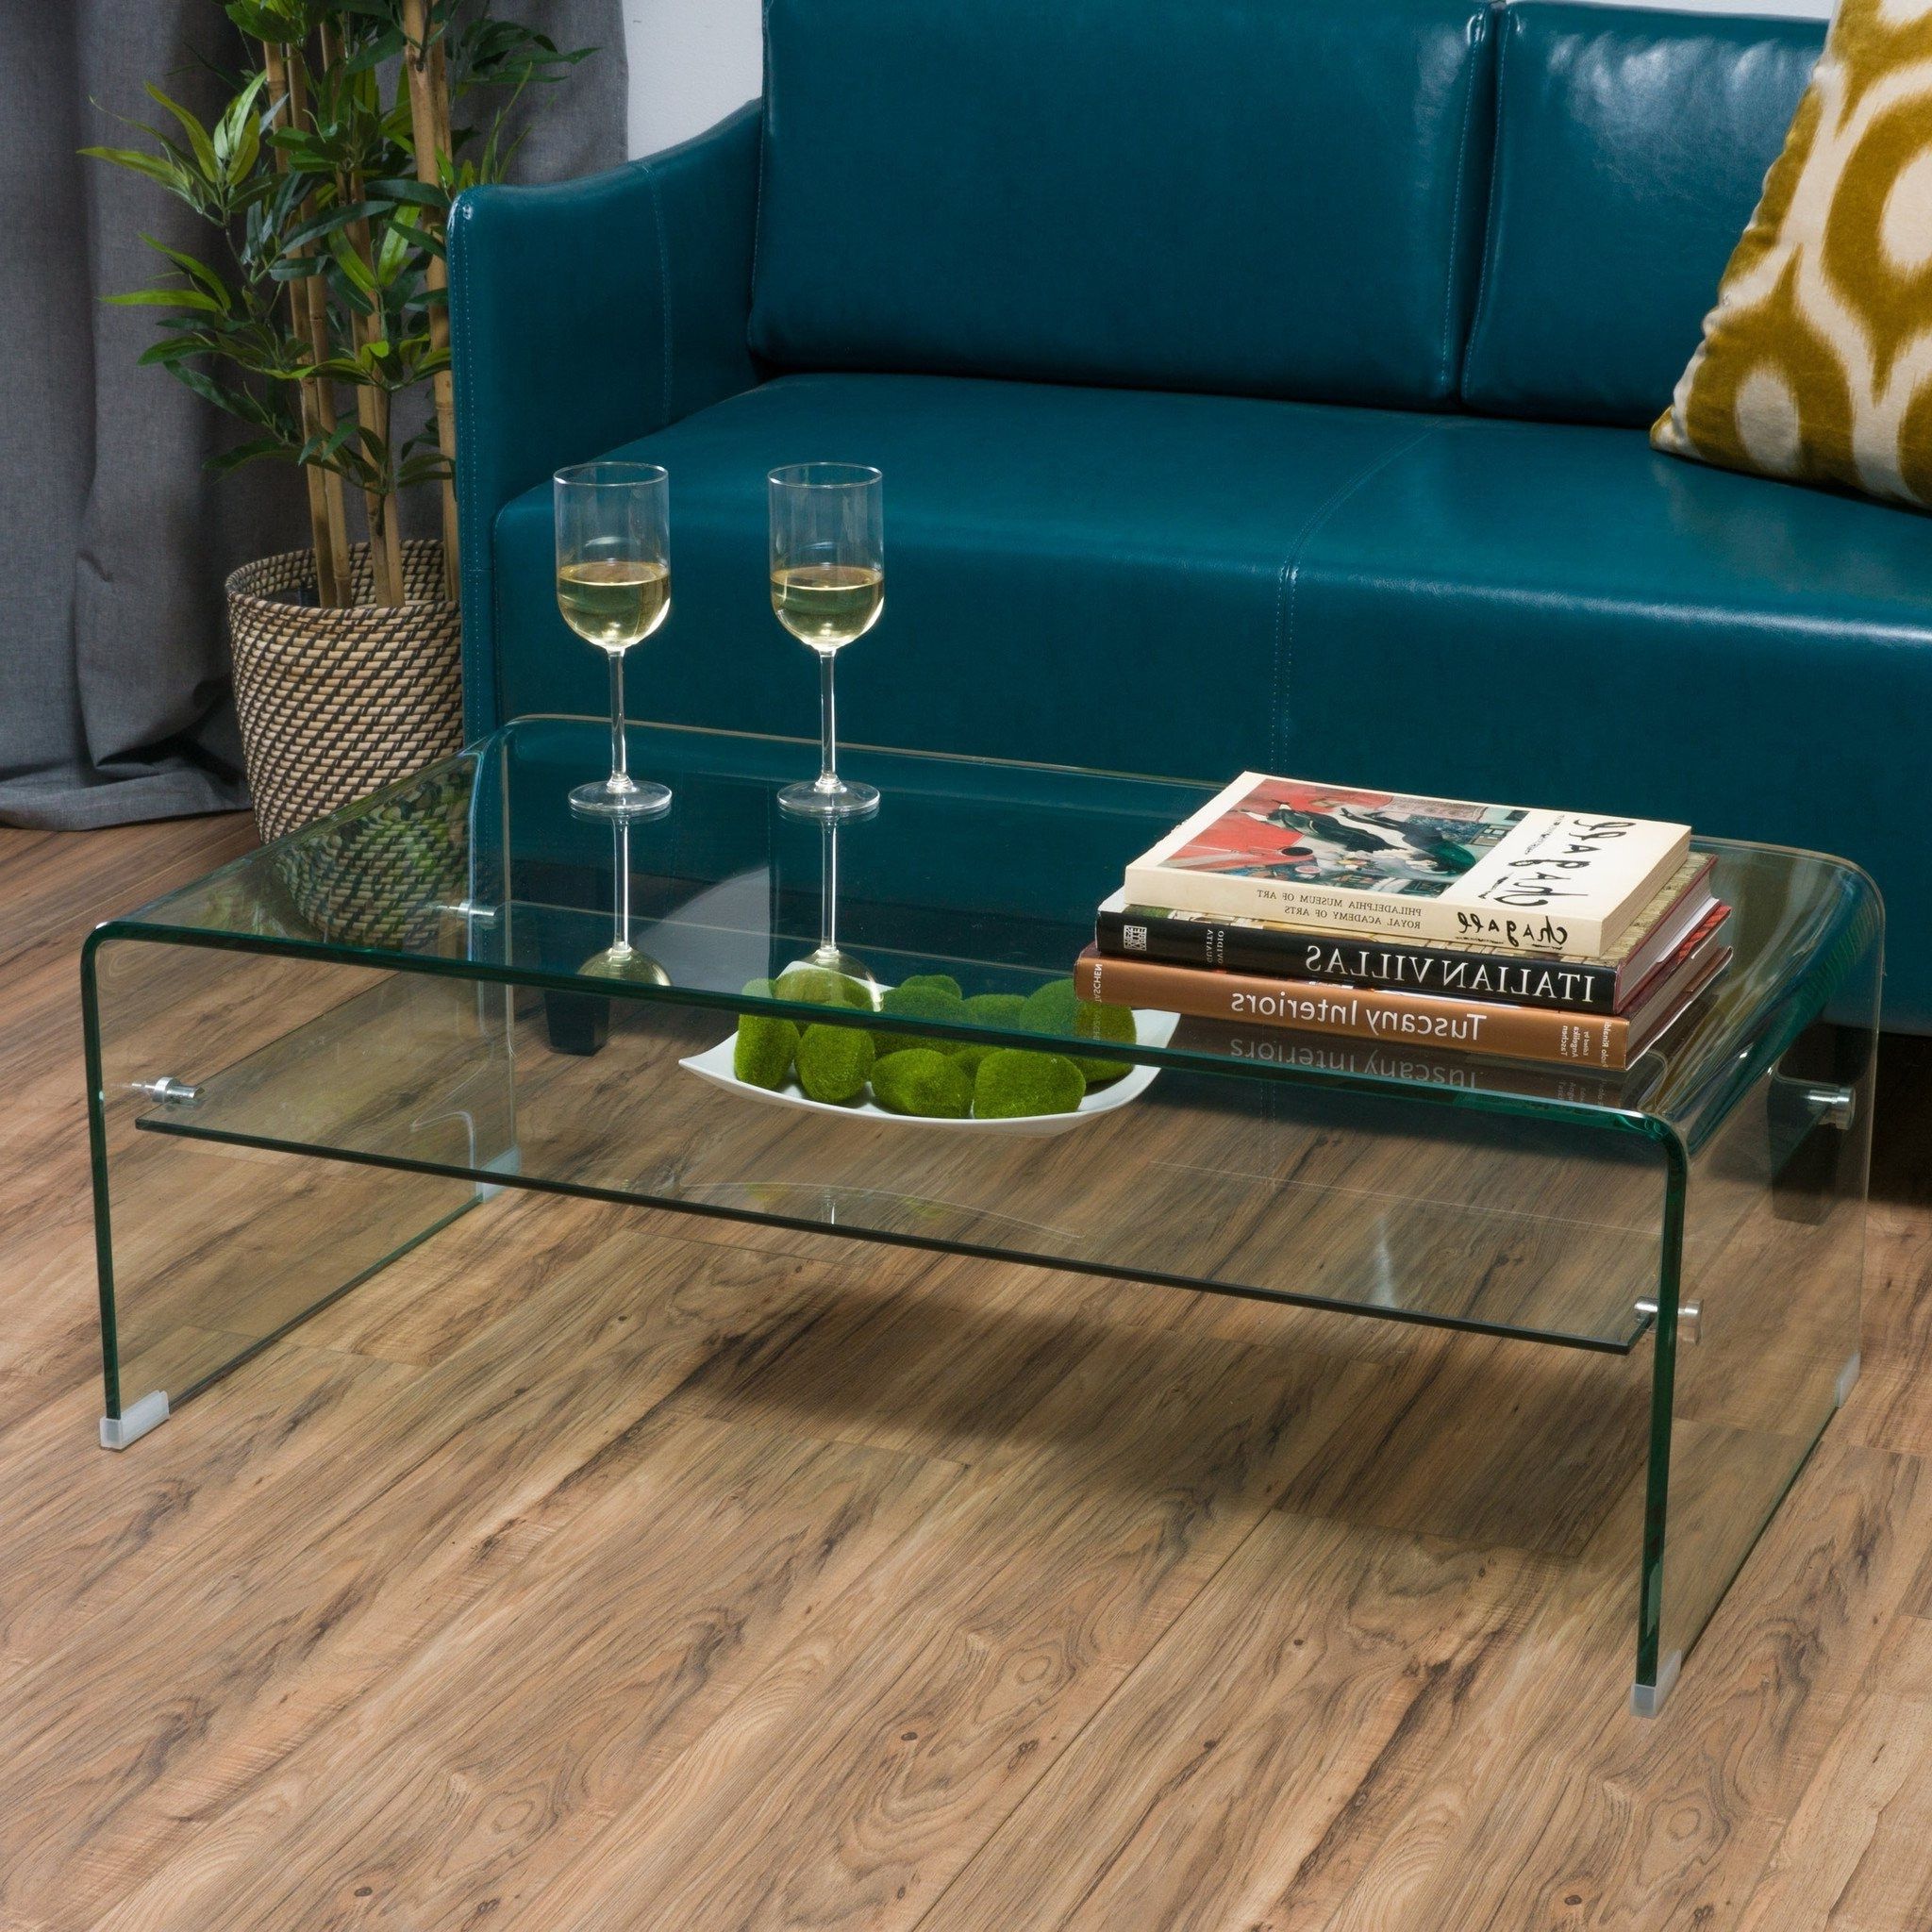 Fashionable Rectangular Glass Top Coffee Tables With Regard To Classon Glass Rectangle Coffee Table W/ Shelf In Coffee (View 12 of 20)